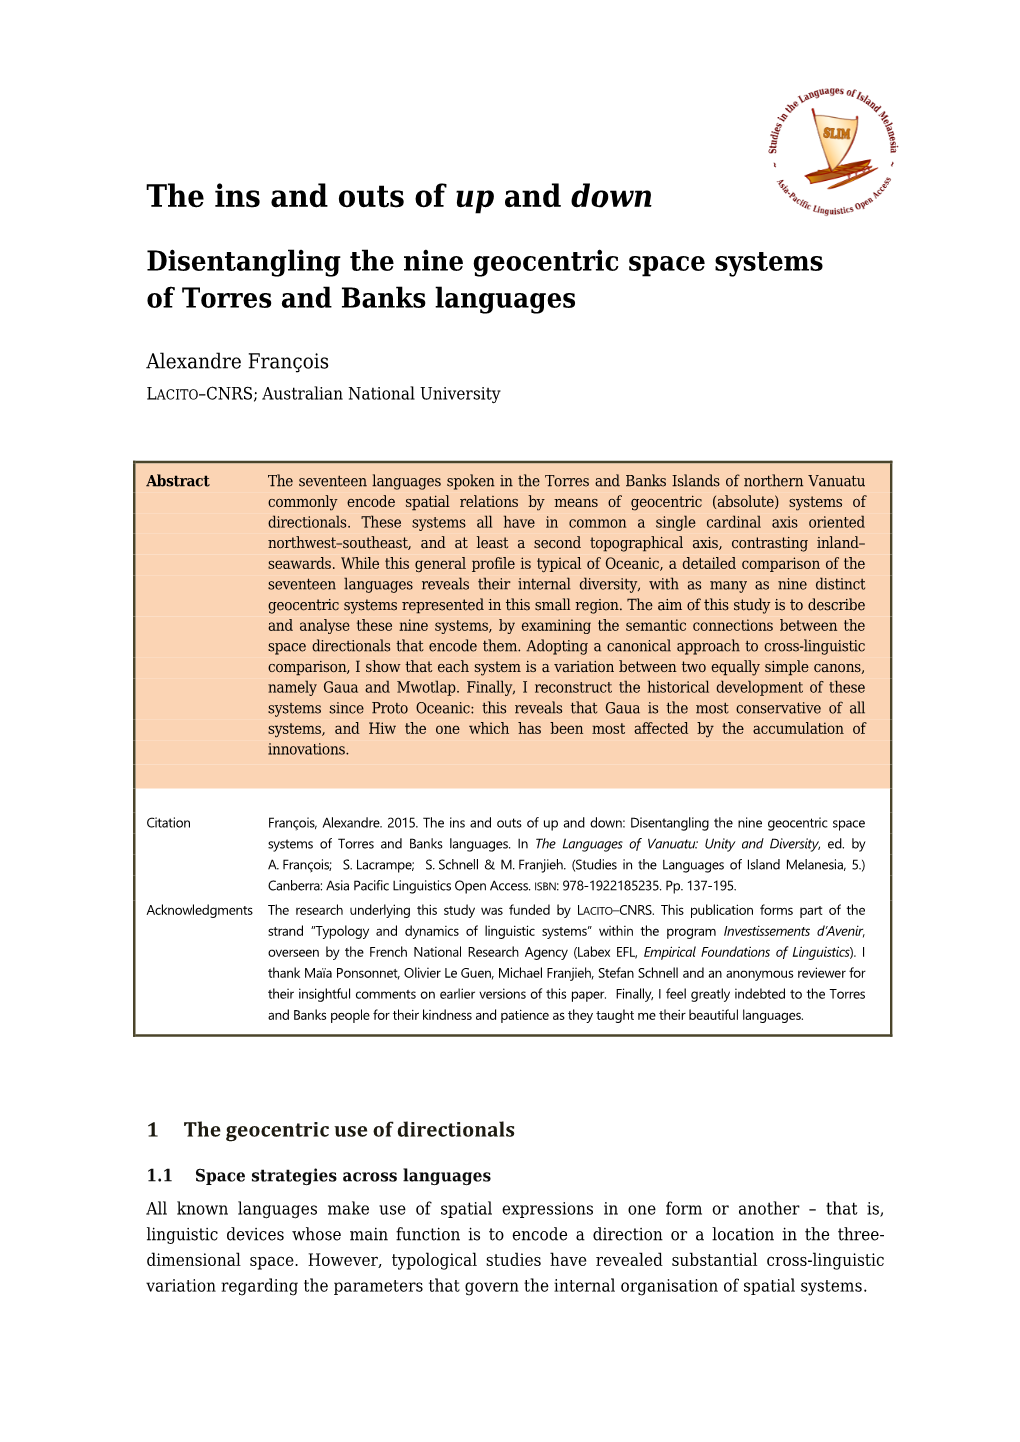 The Ins and Outs of up and Down: Disentangling the Nine Geocentric Space Systems of Torres and Banks Languages